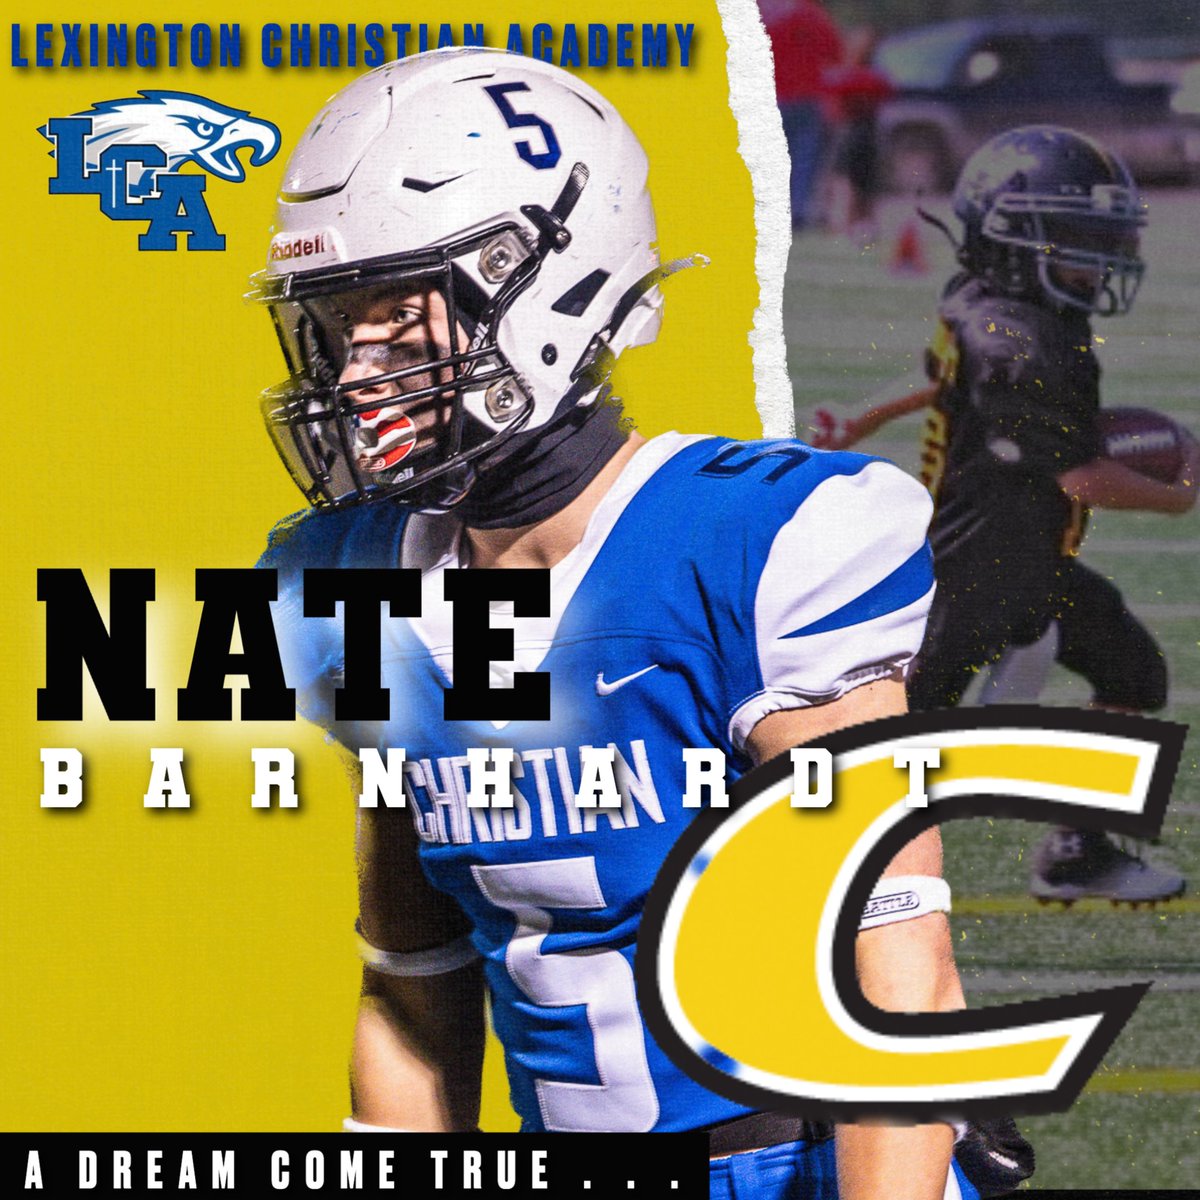 #DREAMCOMETRUE as senior Nate Barnhardt will continue his playing career at Centre College! #WEARELCA